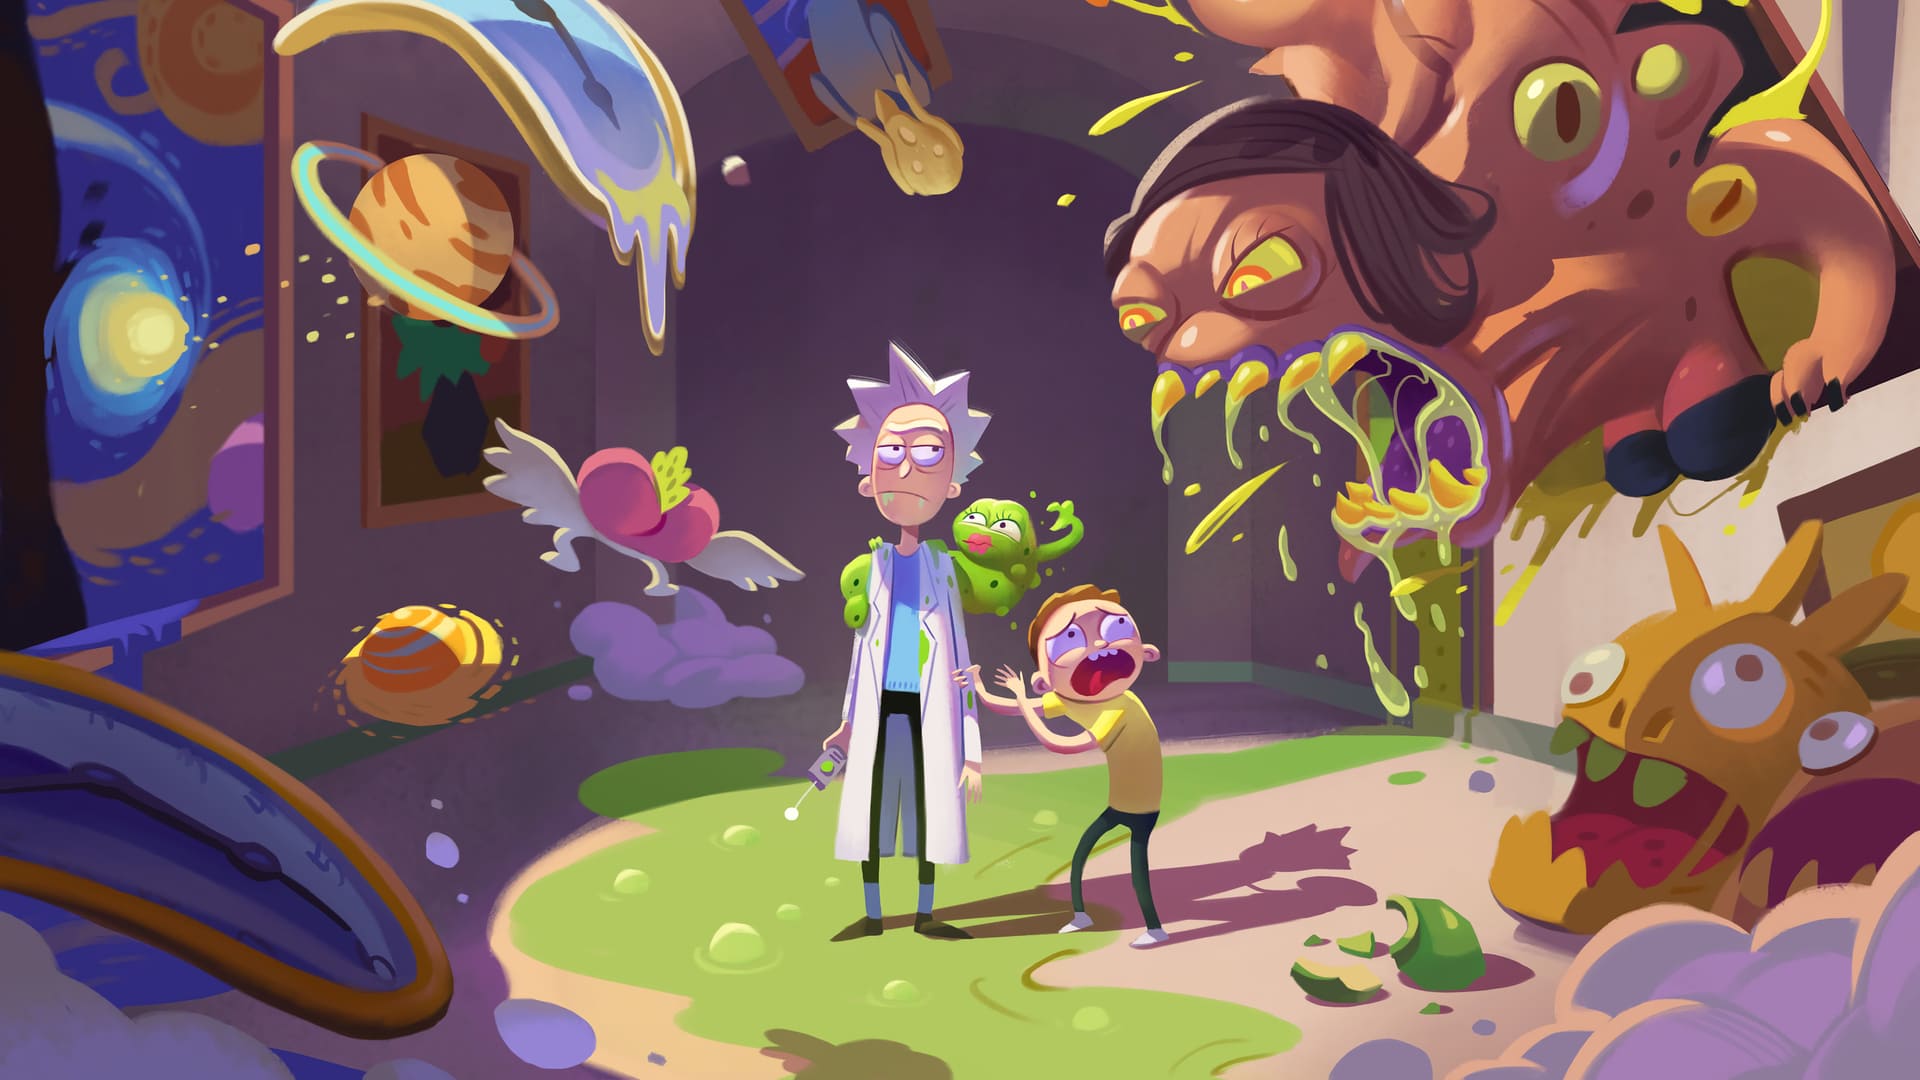 Rick and Morty Wallpapers - Top Best 85 Rick and Morty Backgrounds